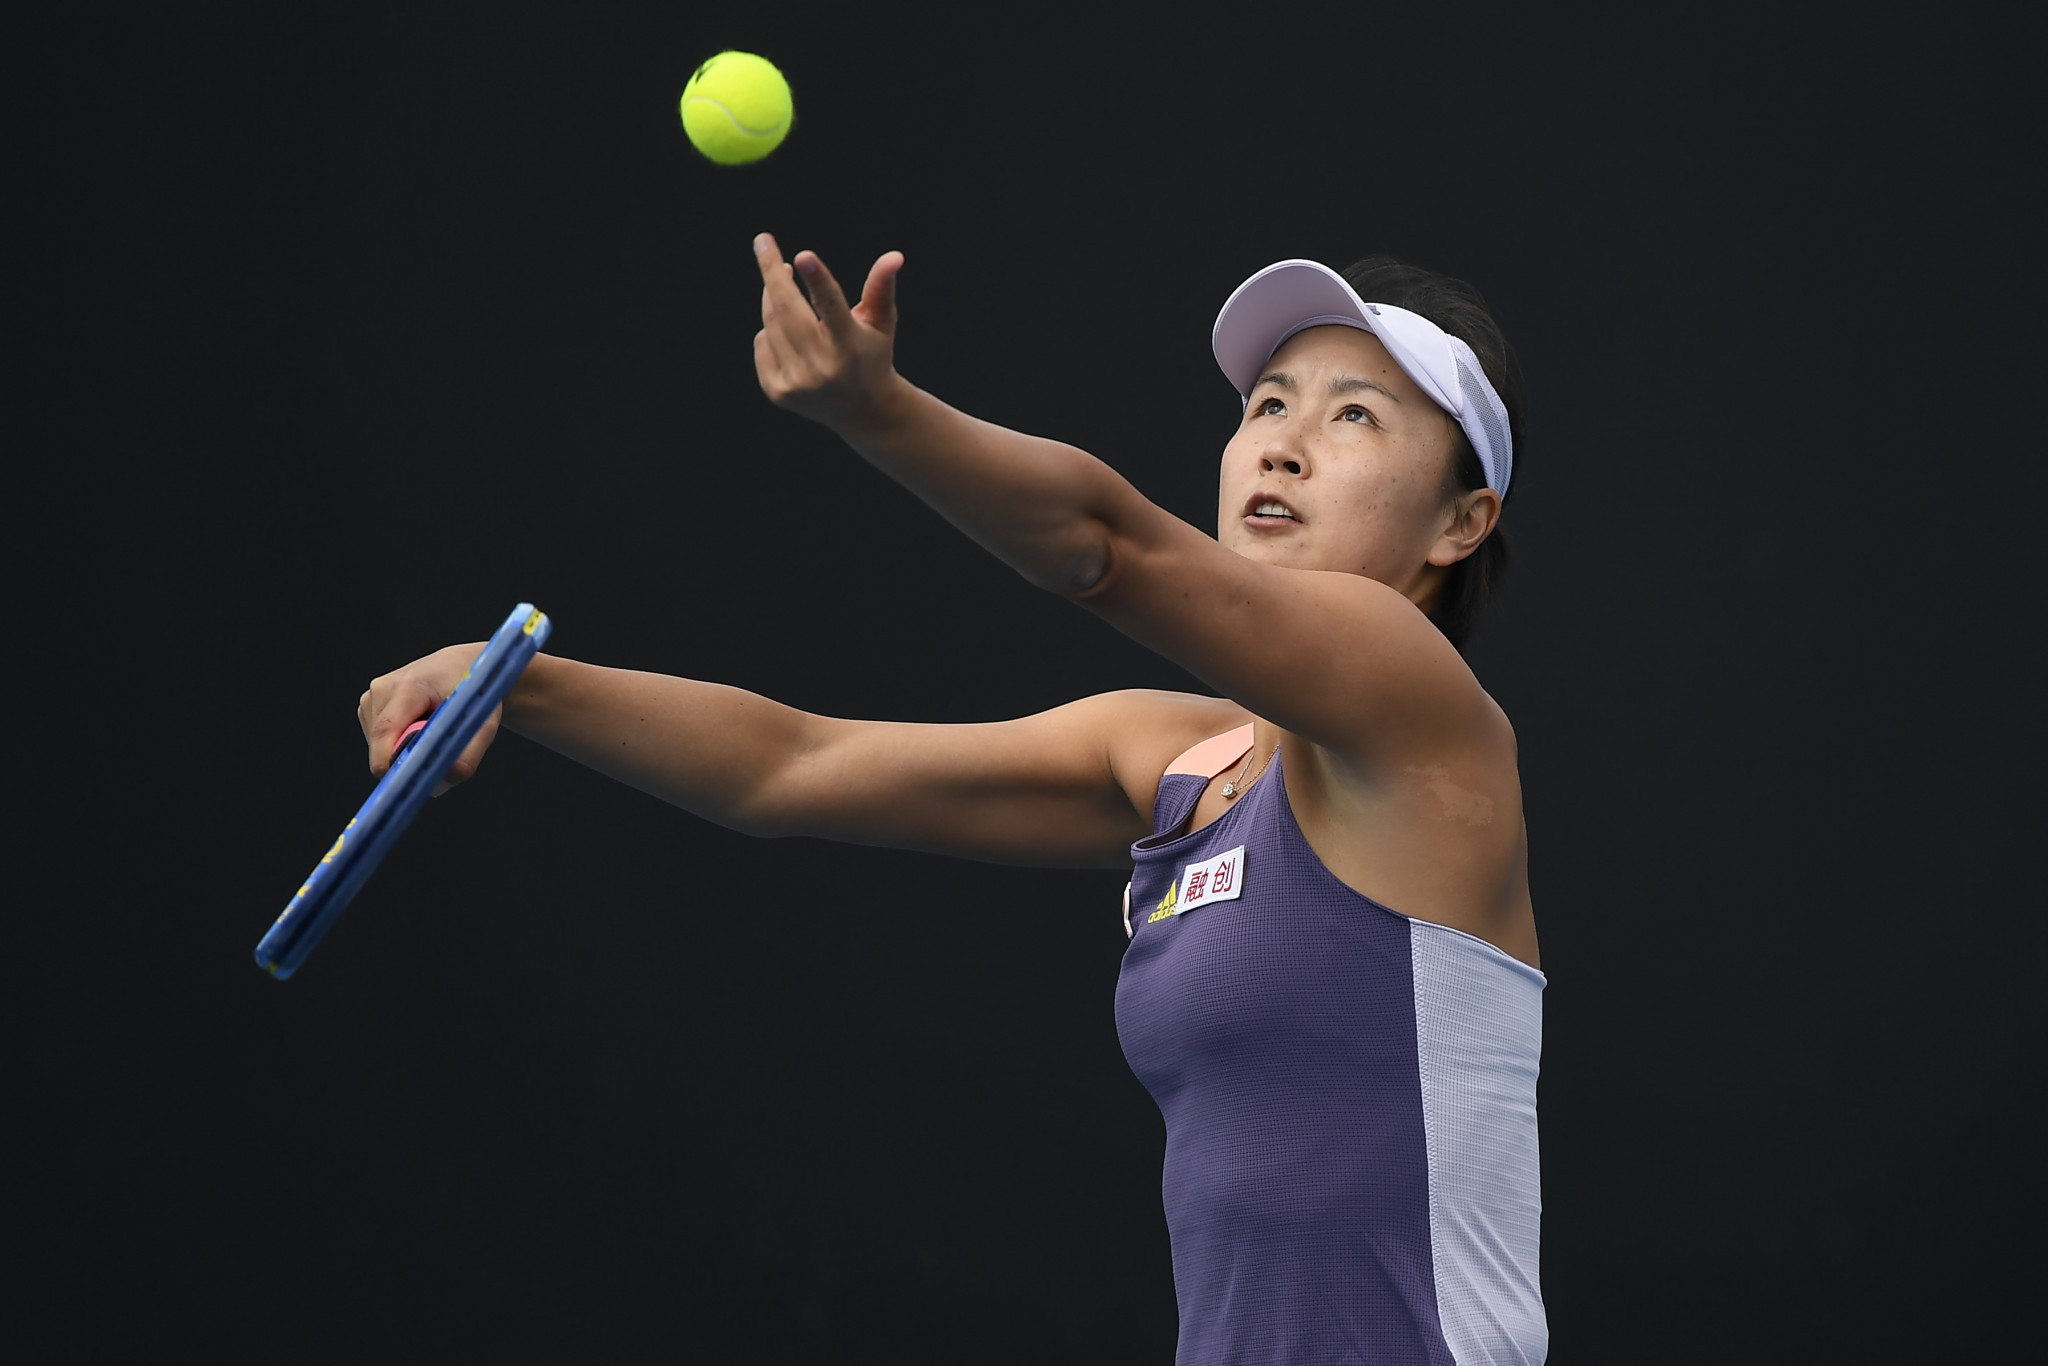 Tennis Australia orders confiscation of Peng Shuai shirts and banners at Australian Open